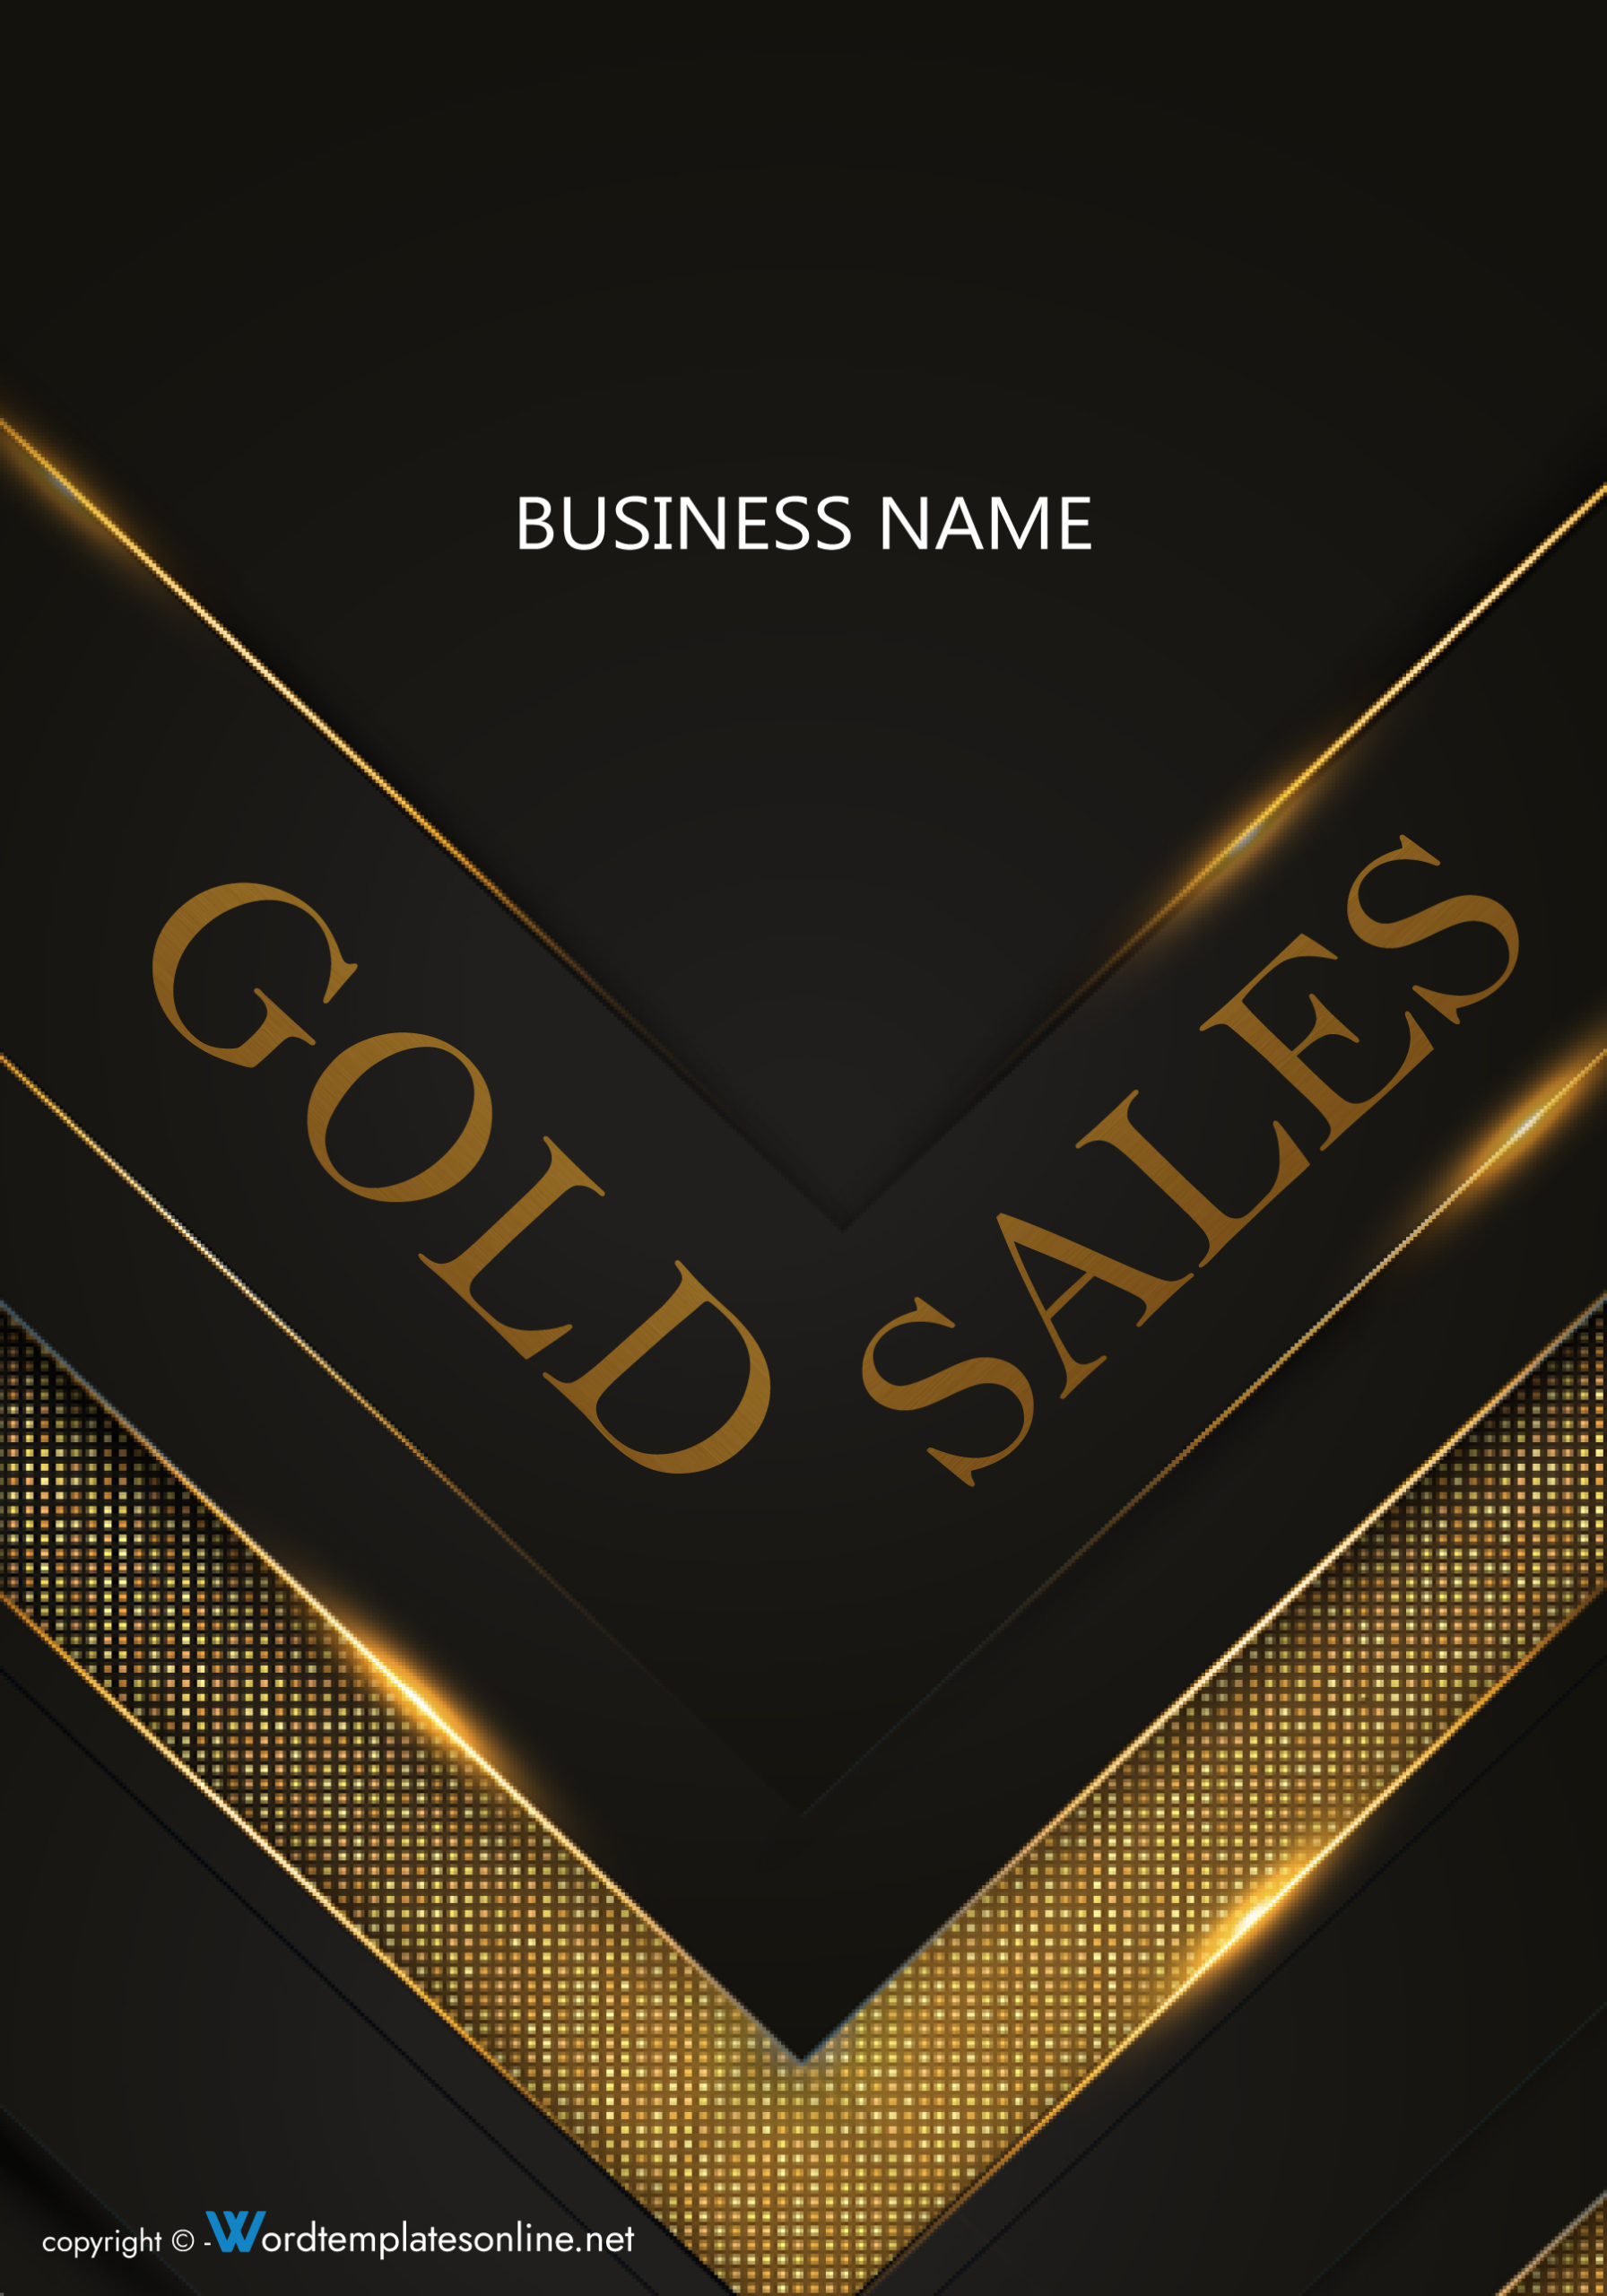 Gold Sales Report Cover Page Template - Free Illustrator Format